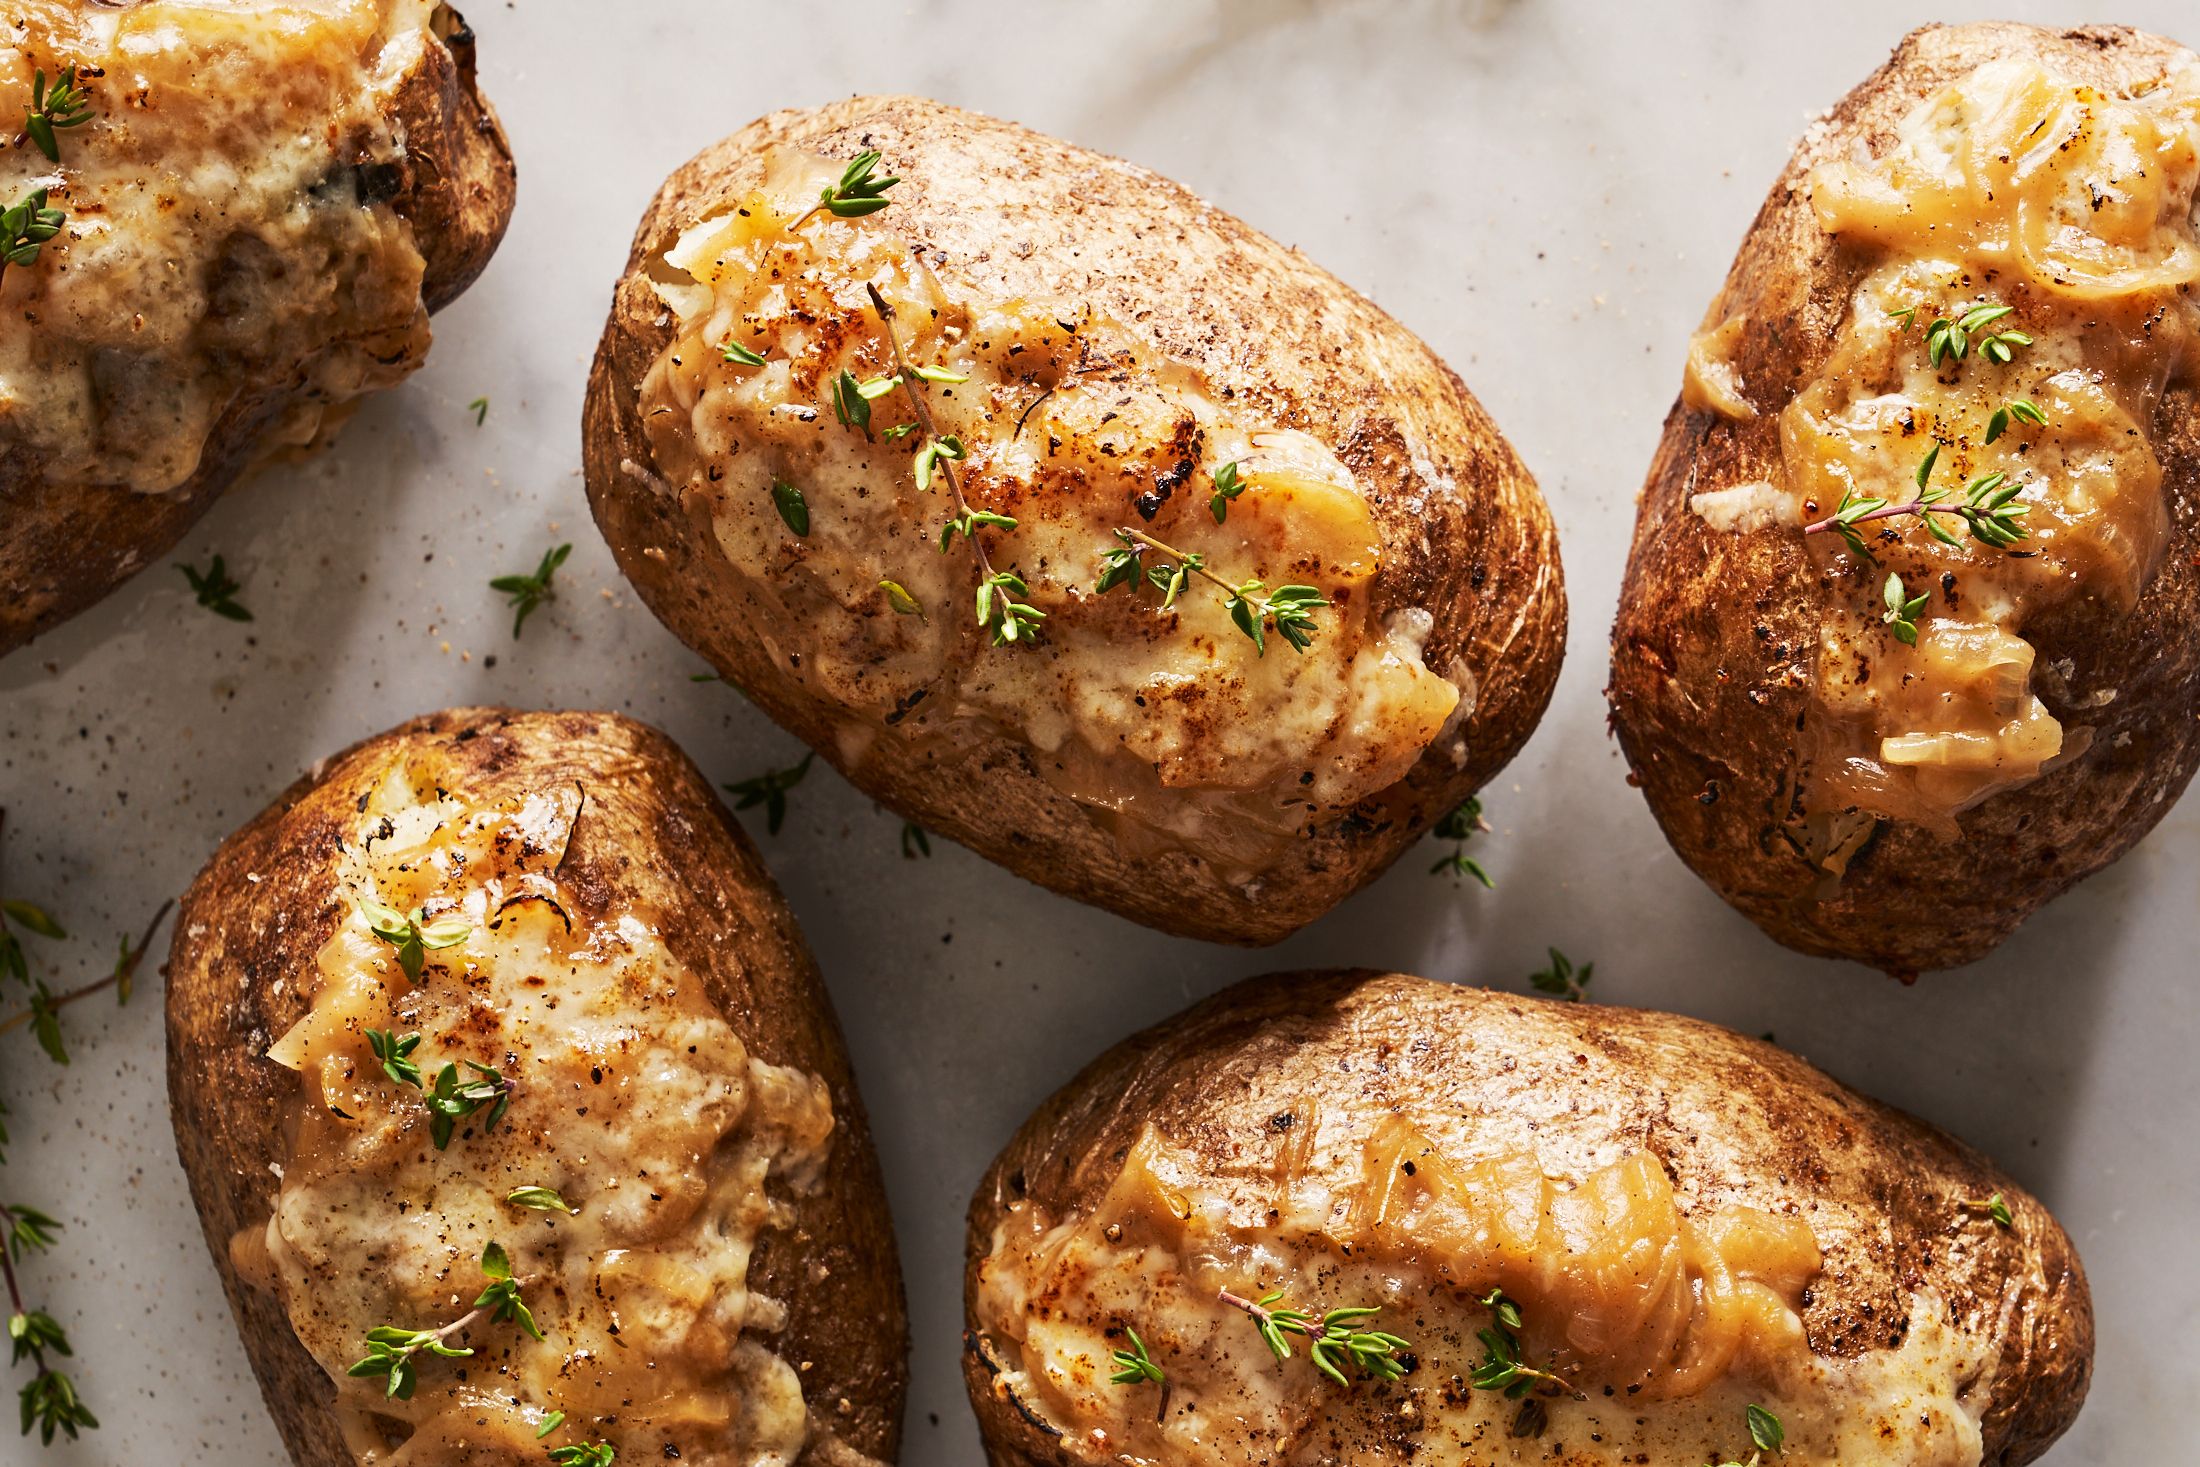 21 Baked Potato Recipes To Add To Your Dinner Rotation - Brit + Co